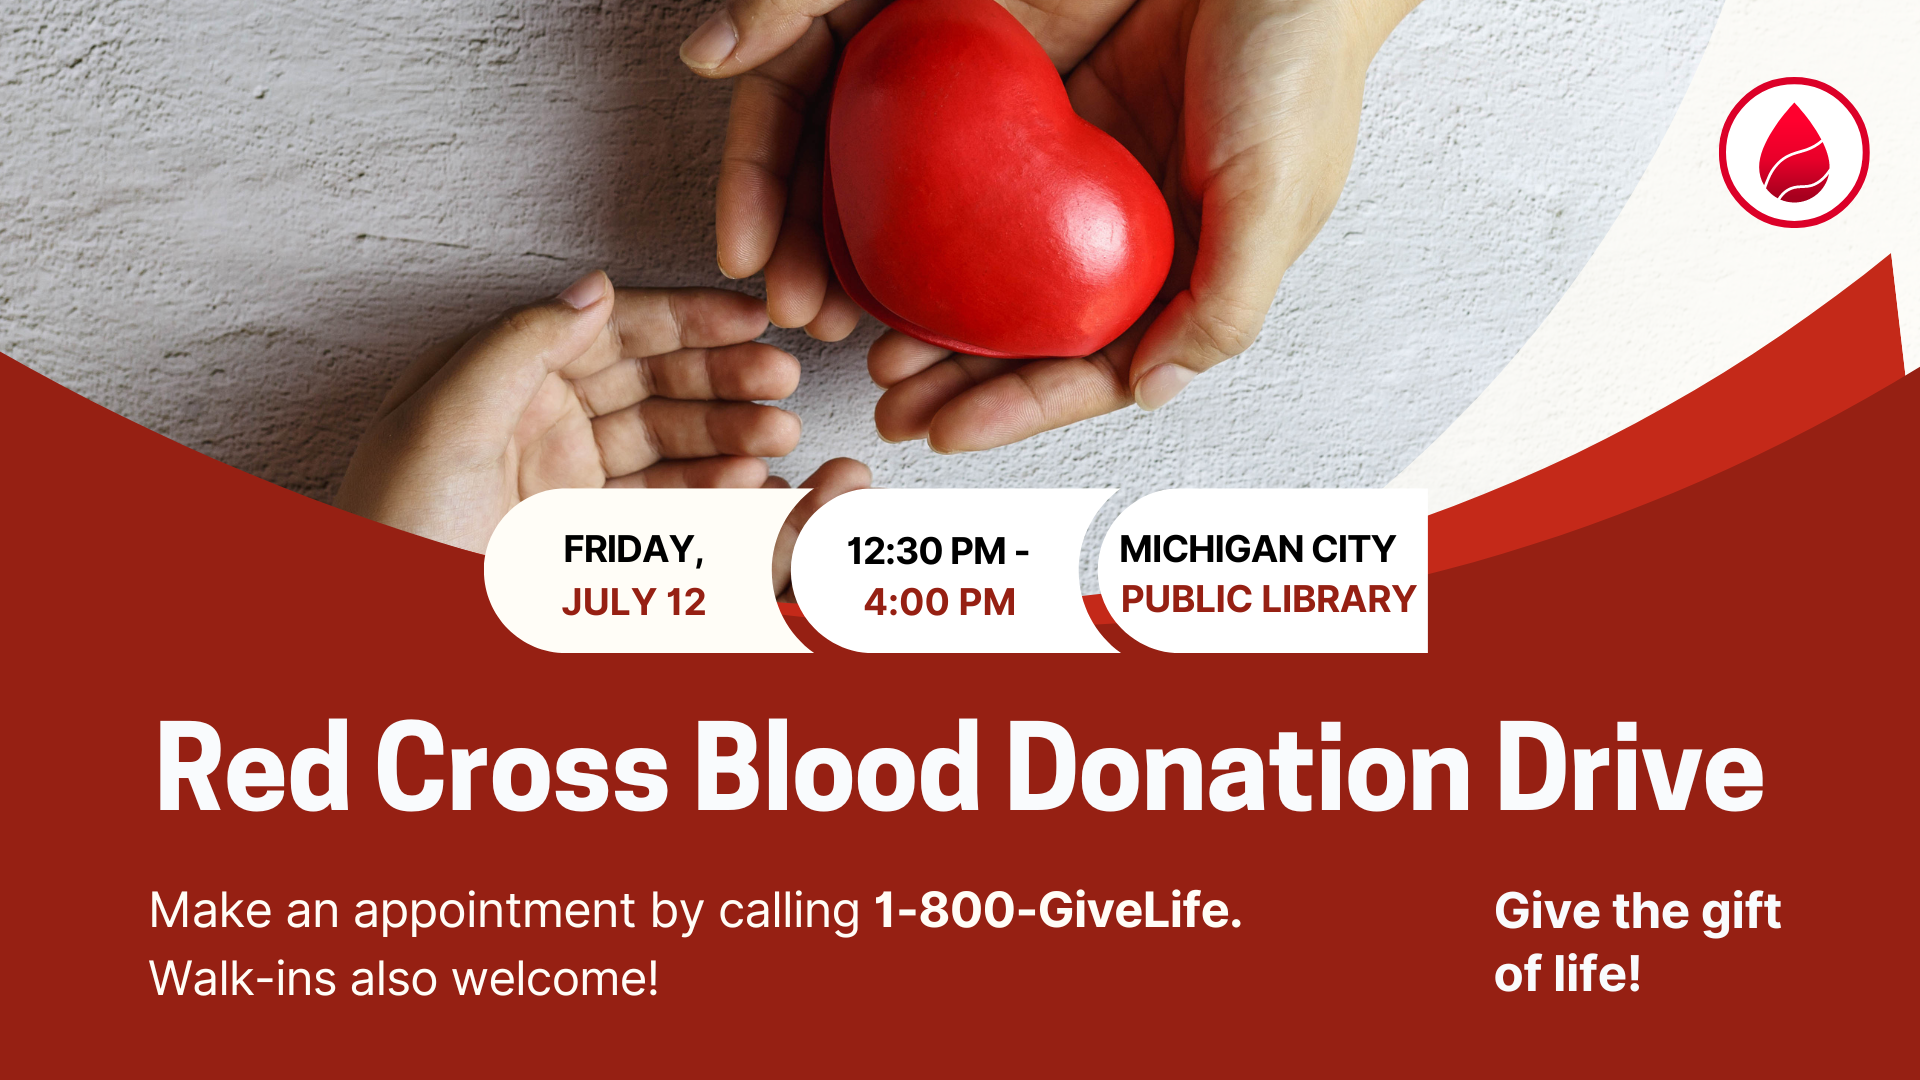 Red Cross Blood Donation Drive, Friday, July 12, 12:30- 4:00 pm, Michigan City Public Library